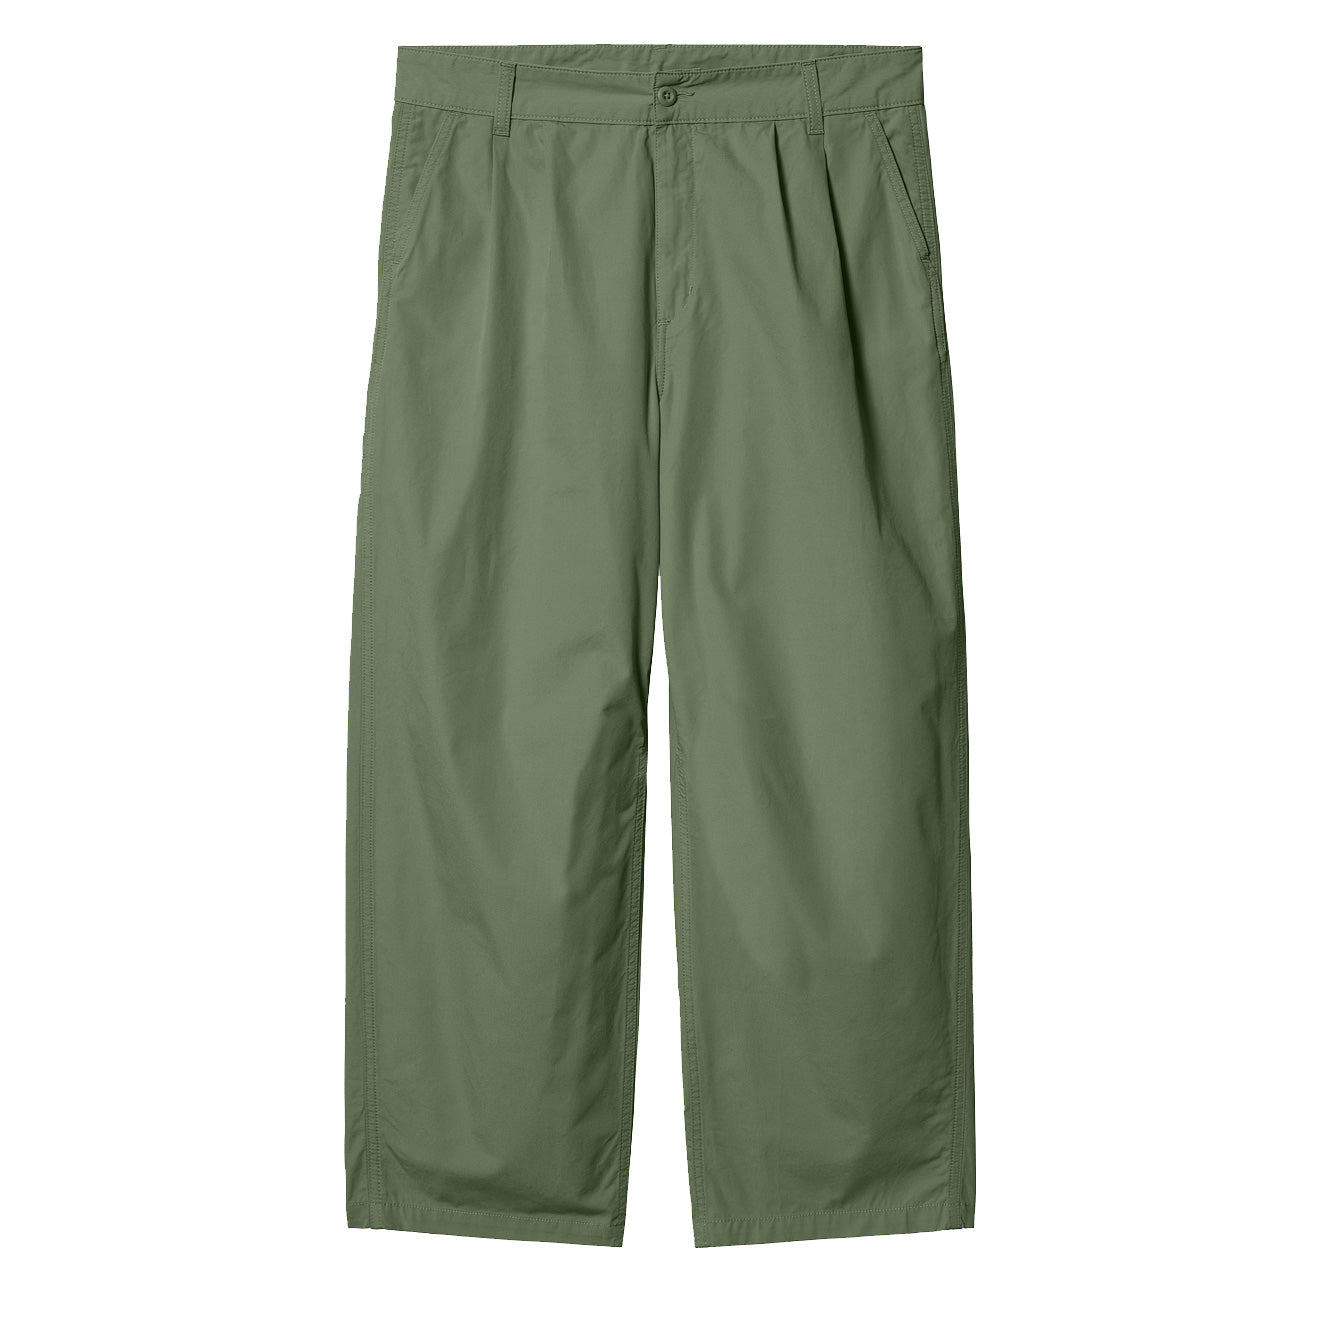 Carhartt WIP Colston Pant Dollar Green Stone Washed | The Sporting Lodge